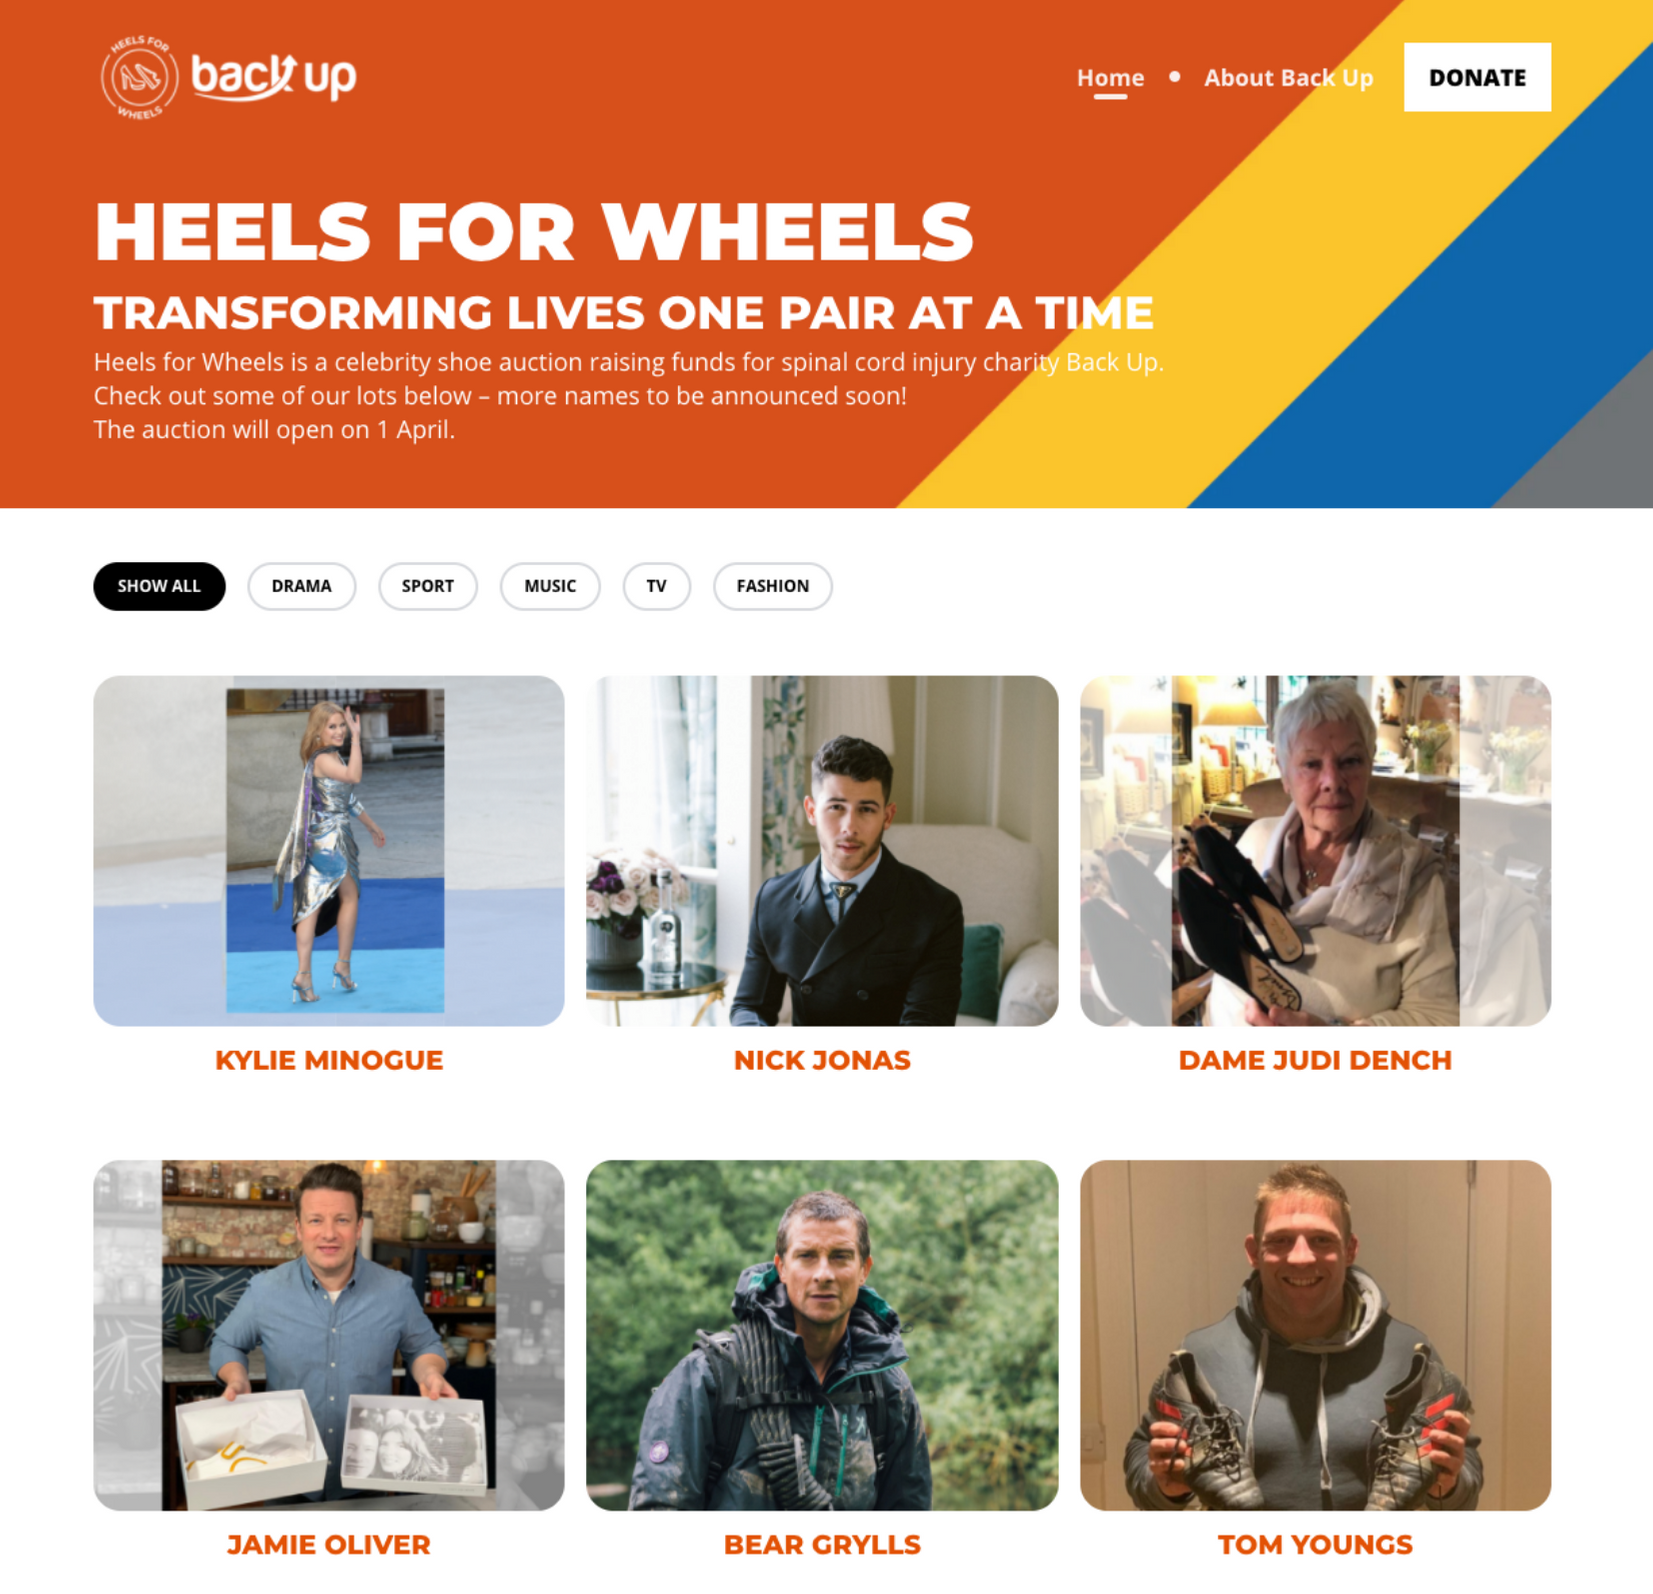 Heels for Wheels homepage for The BackUp Trust using Raisely